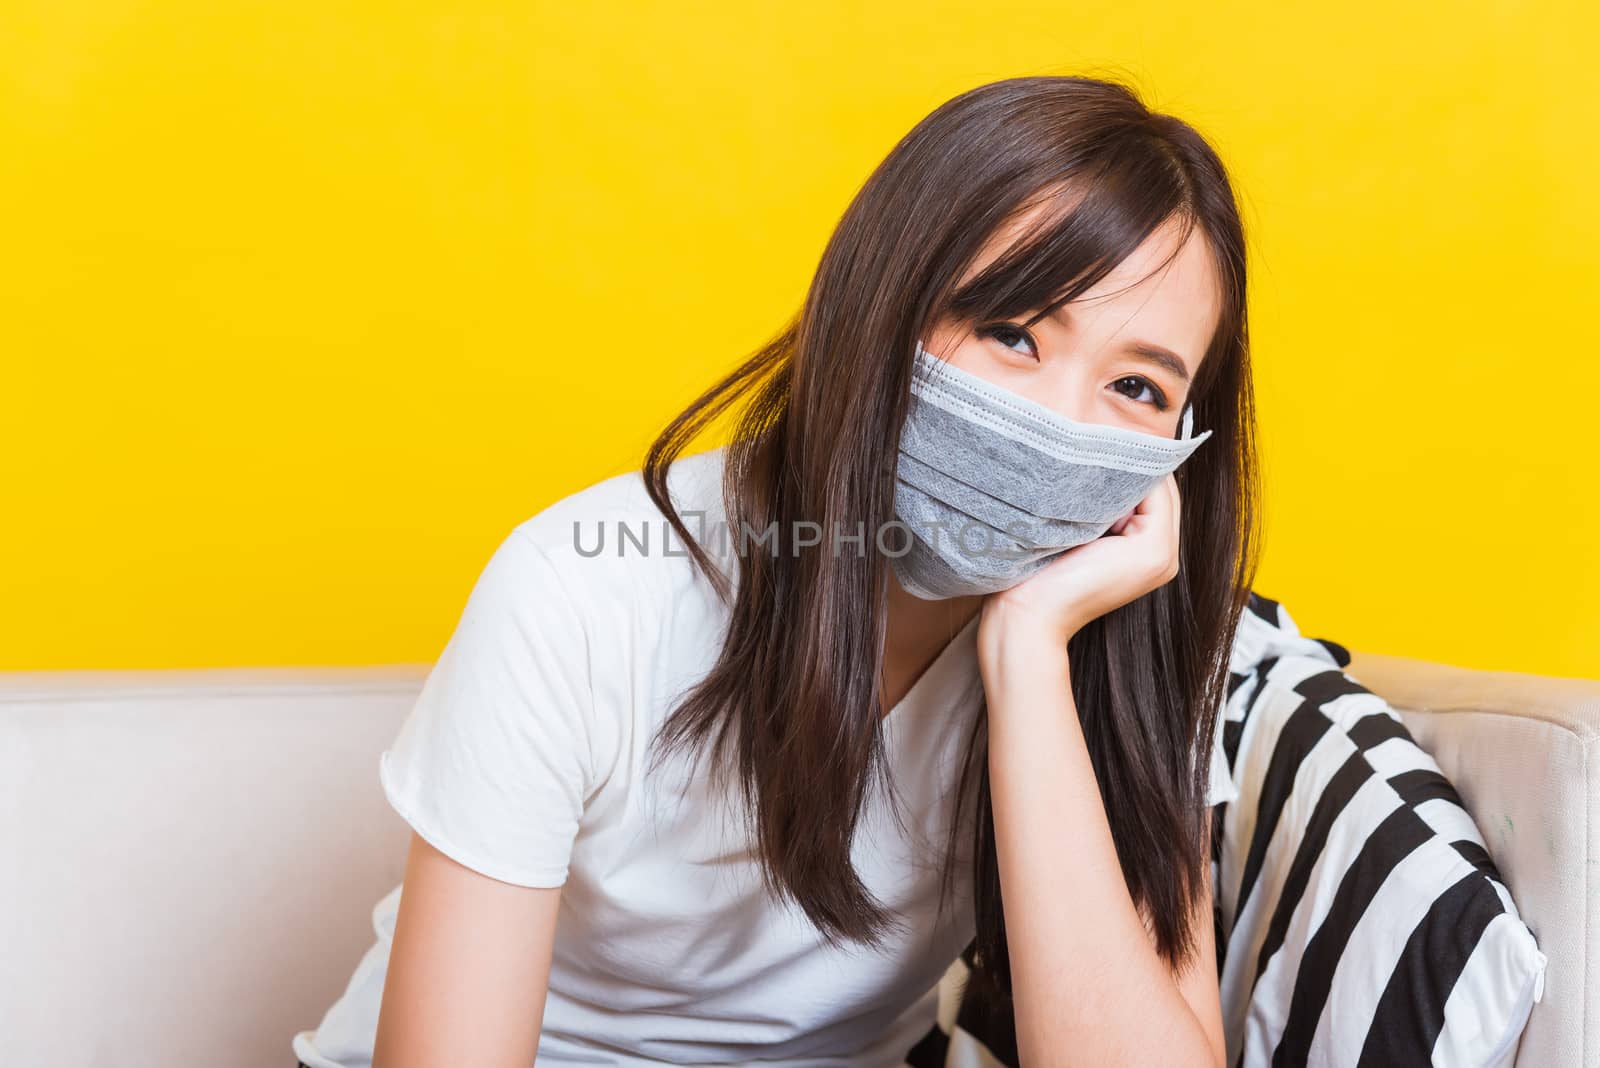 Portrait Asian of beautiful young woman sitting on sofa wearing medical face mask protective during Coronavirus studio shot isolated on yellow background